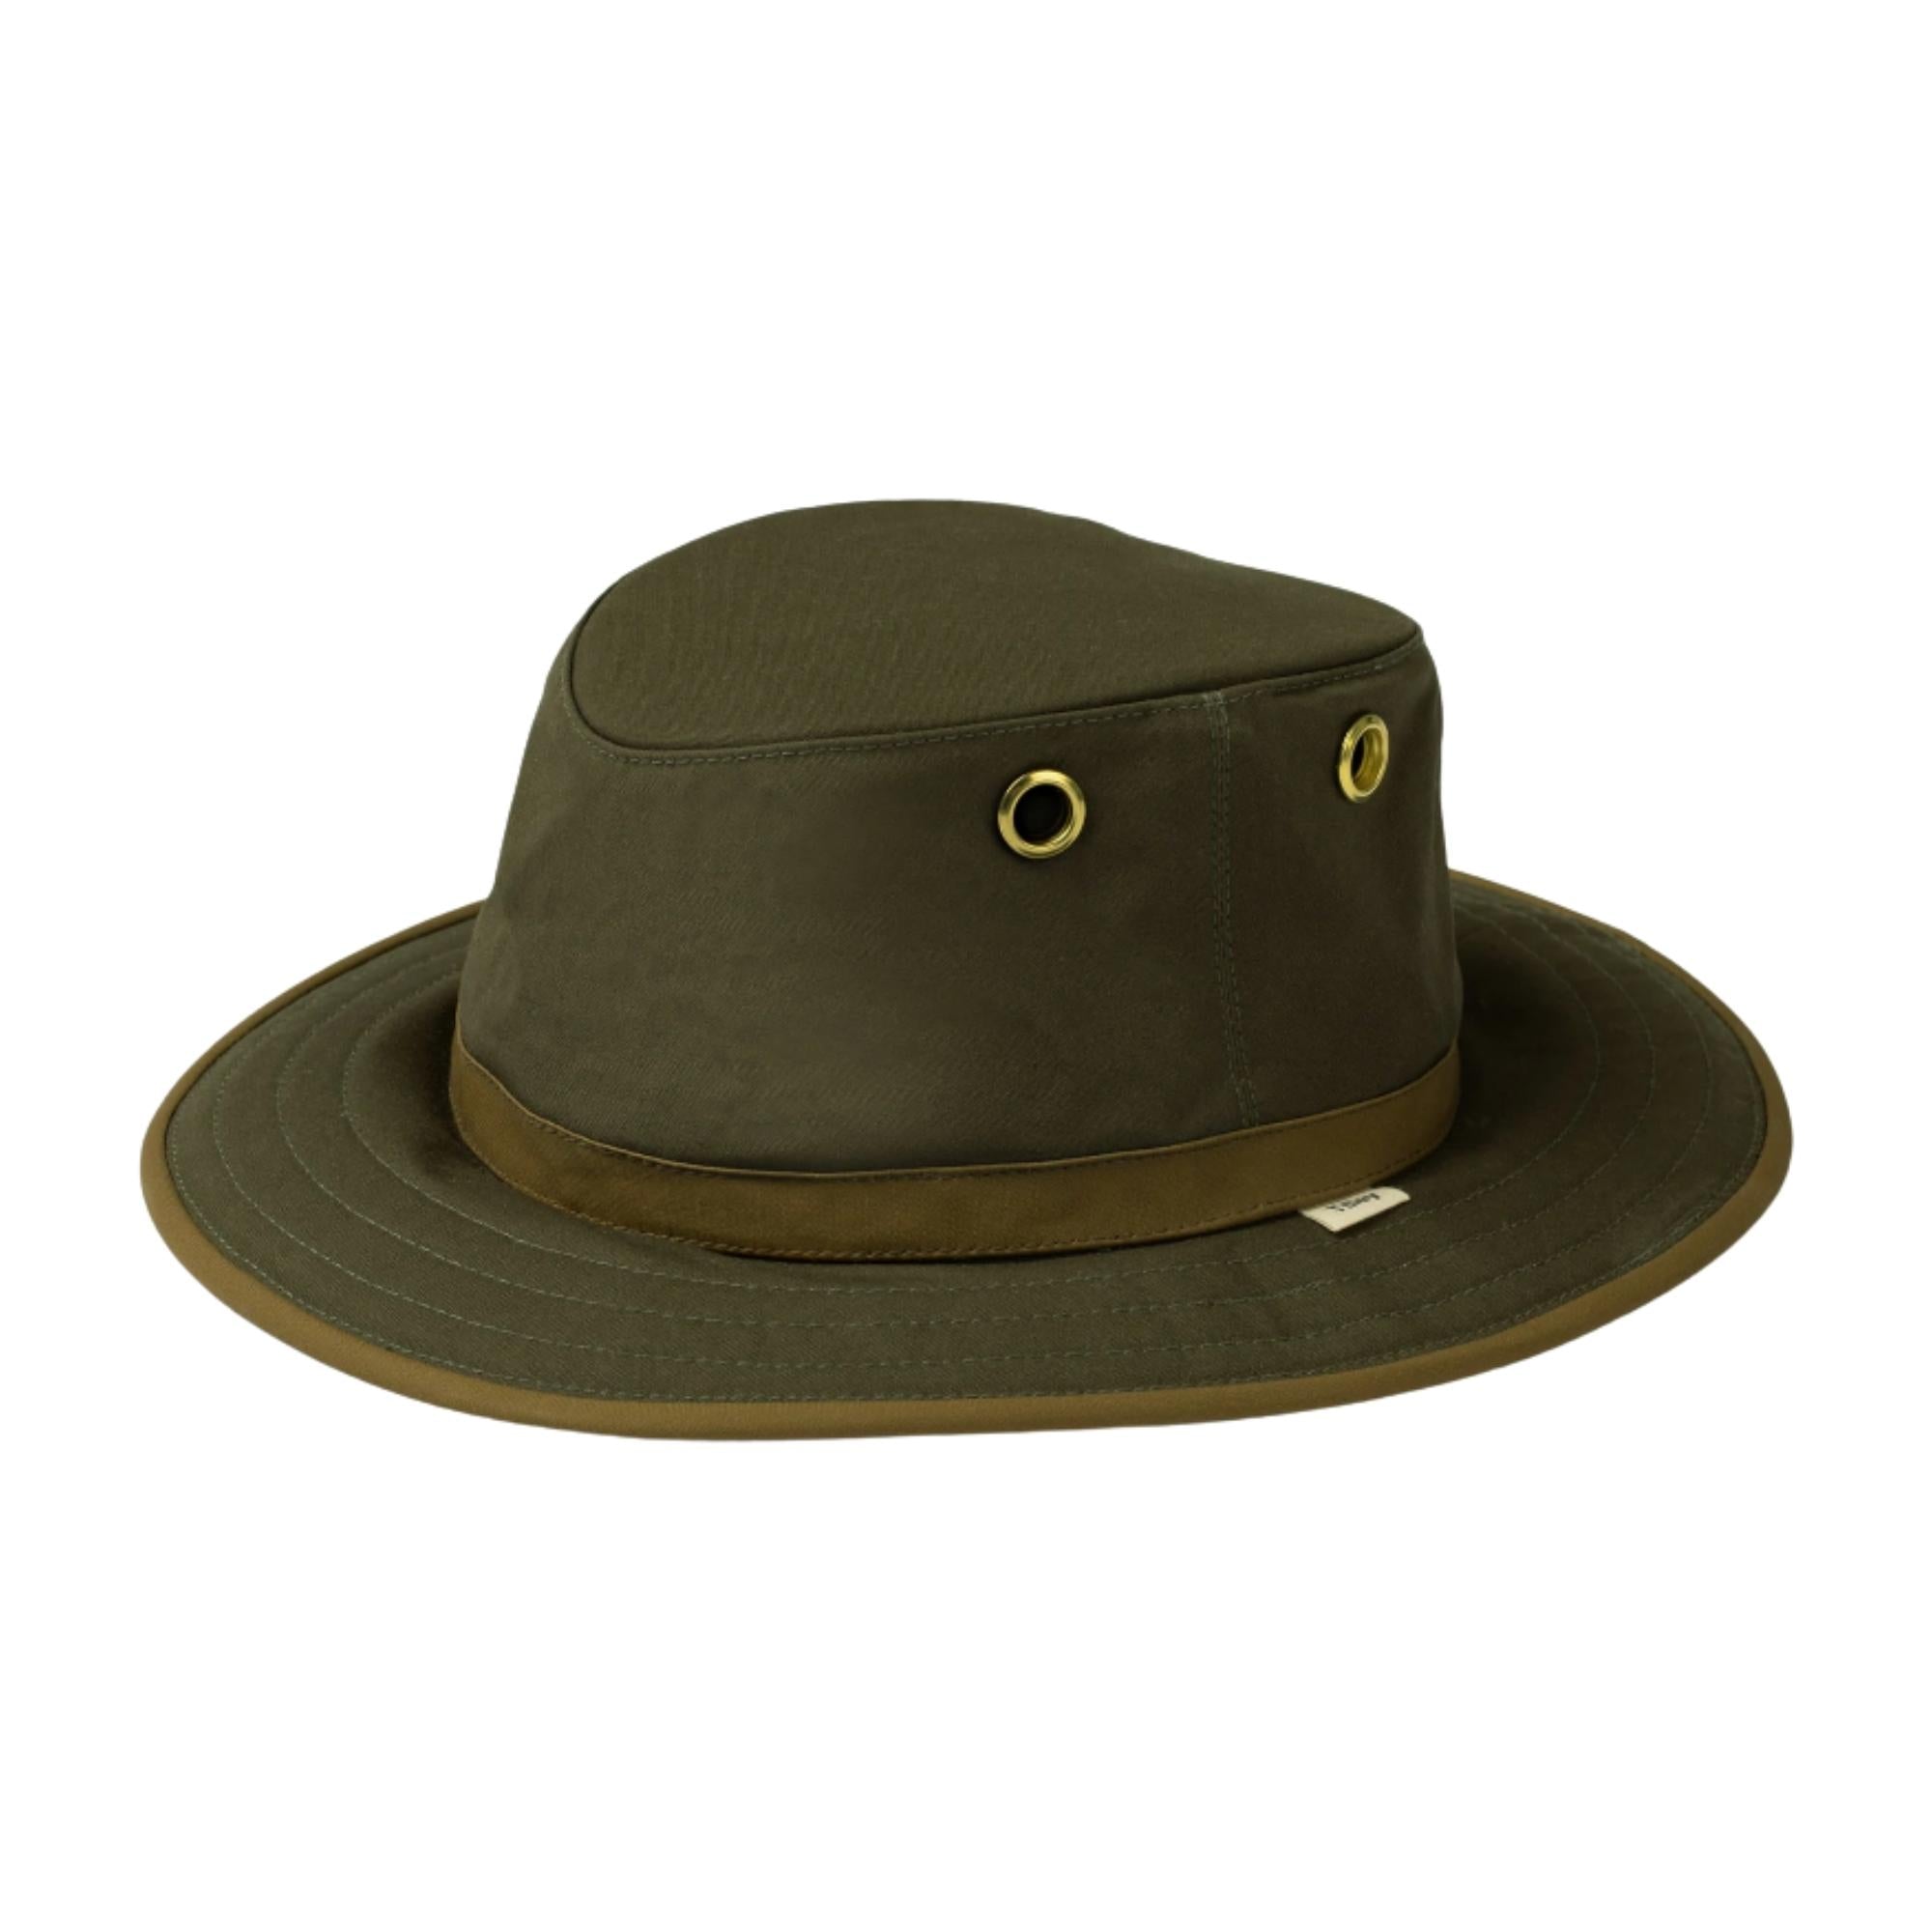 Tilley Outback hat in waxed cotton – Artisans Canada